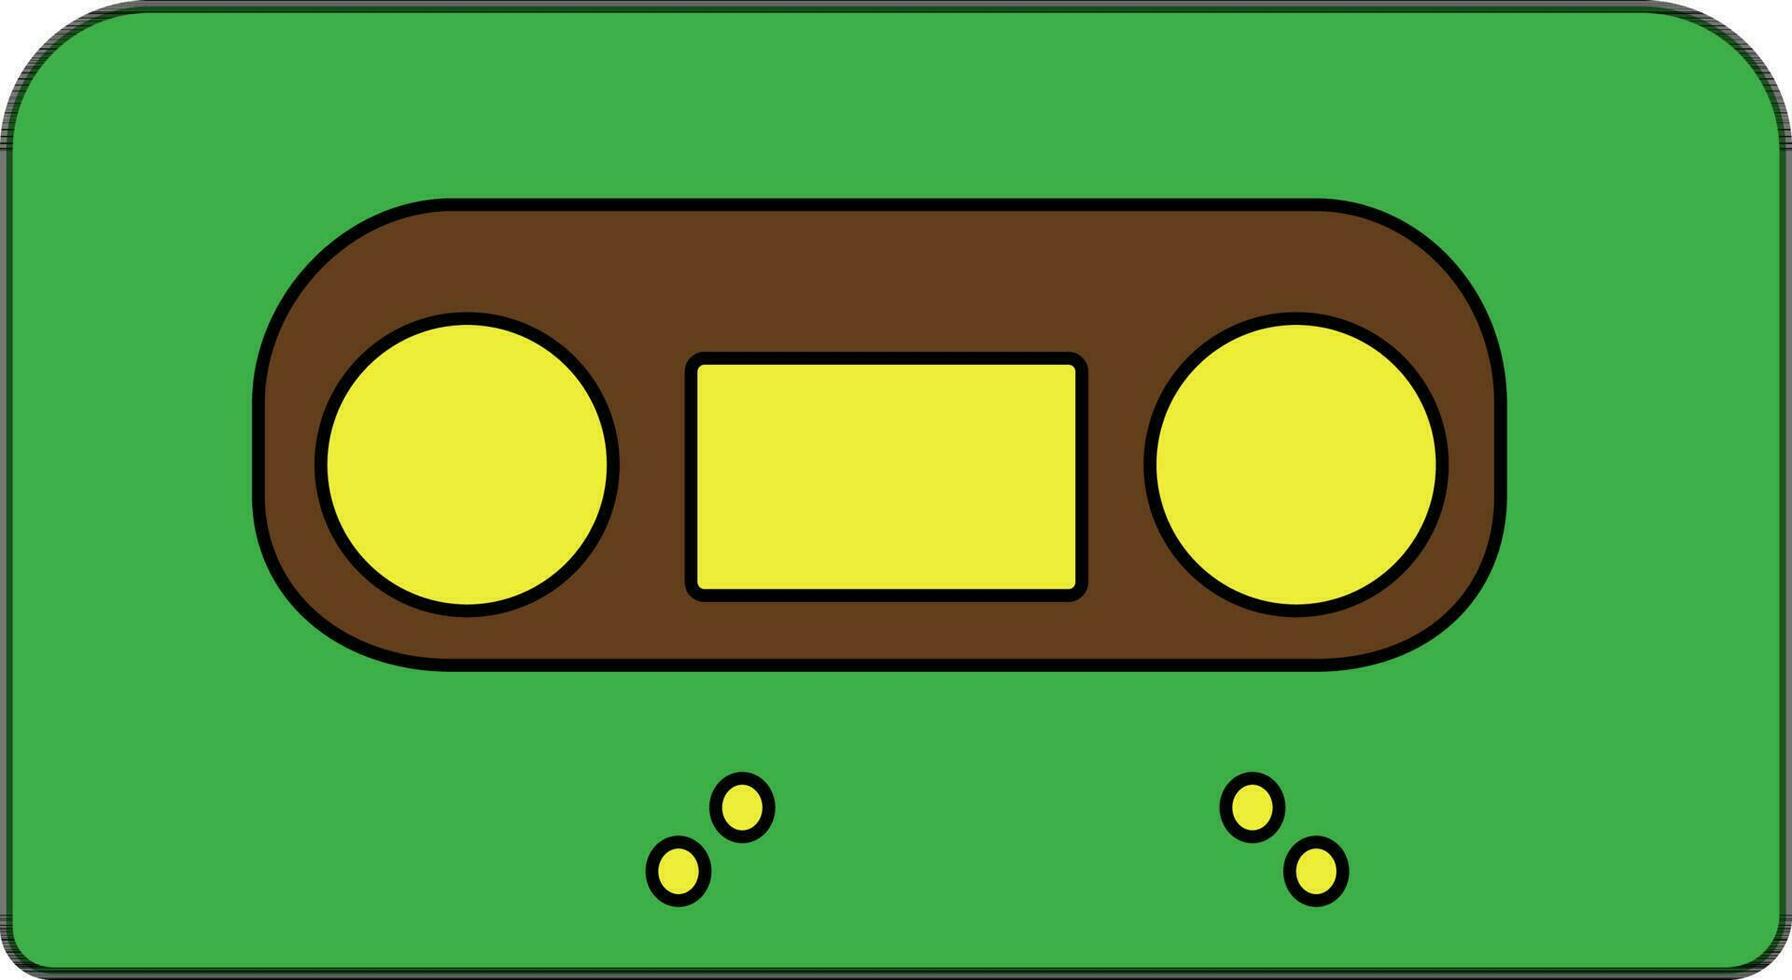 Music cassette in green, yellow and brown color. vector